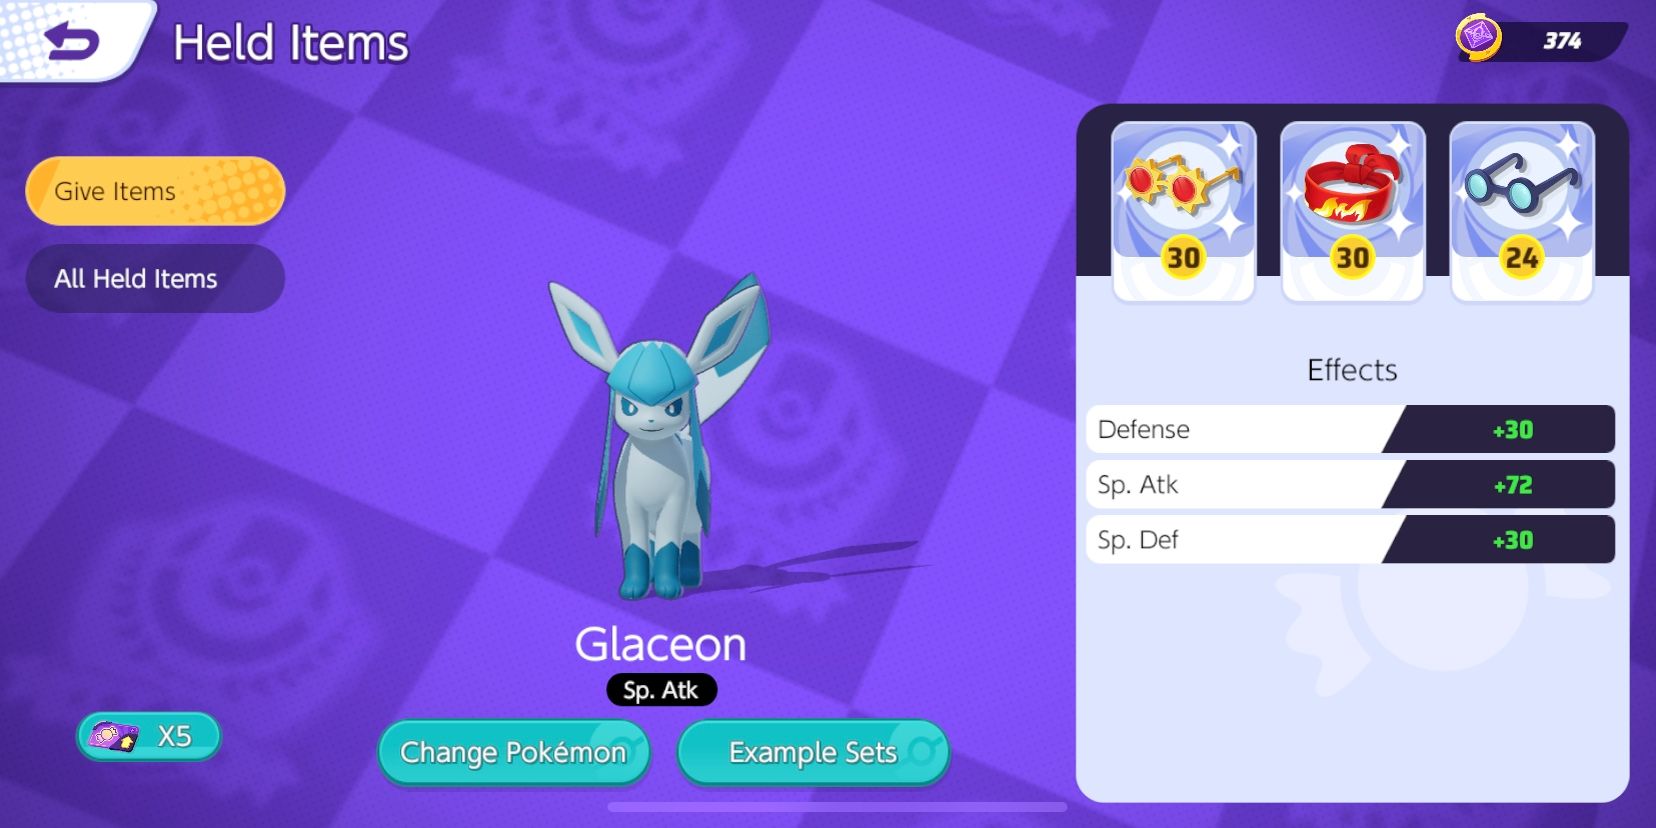 Glaceon's Held Item selection screen, with Choice Specs, Wise Glasses, and Focus Band selected